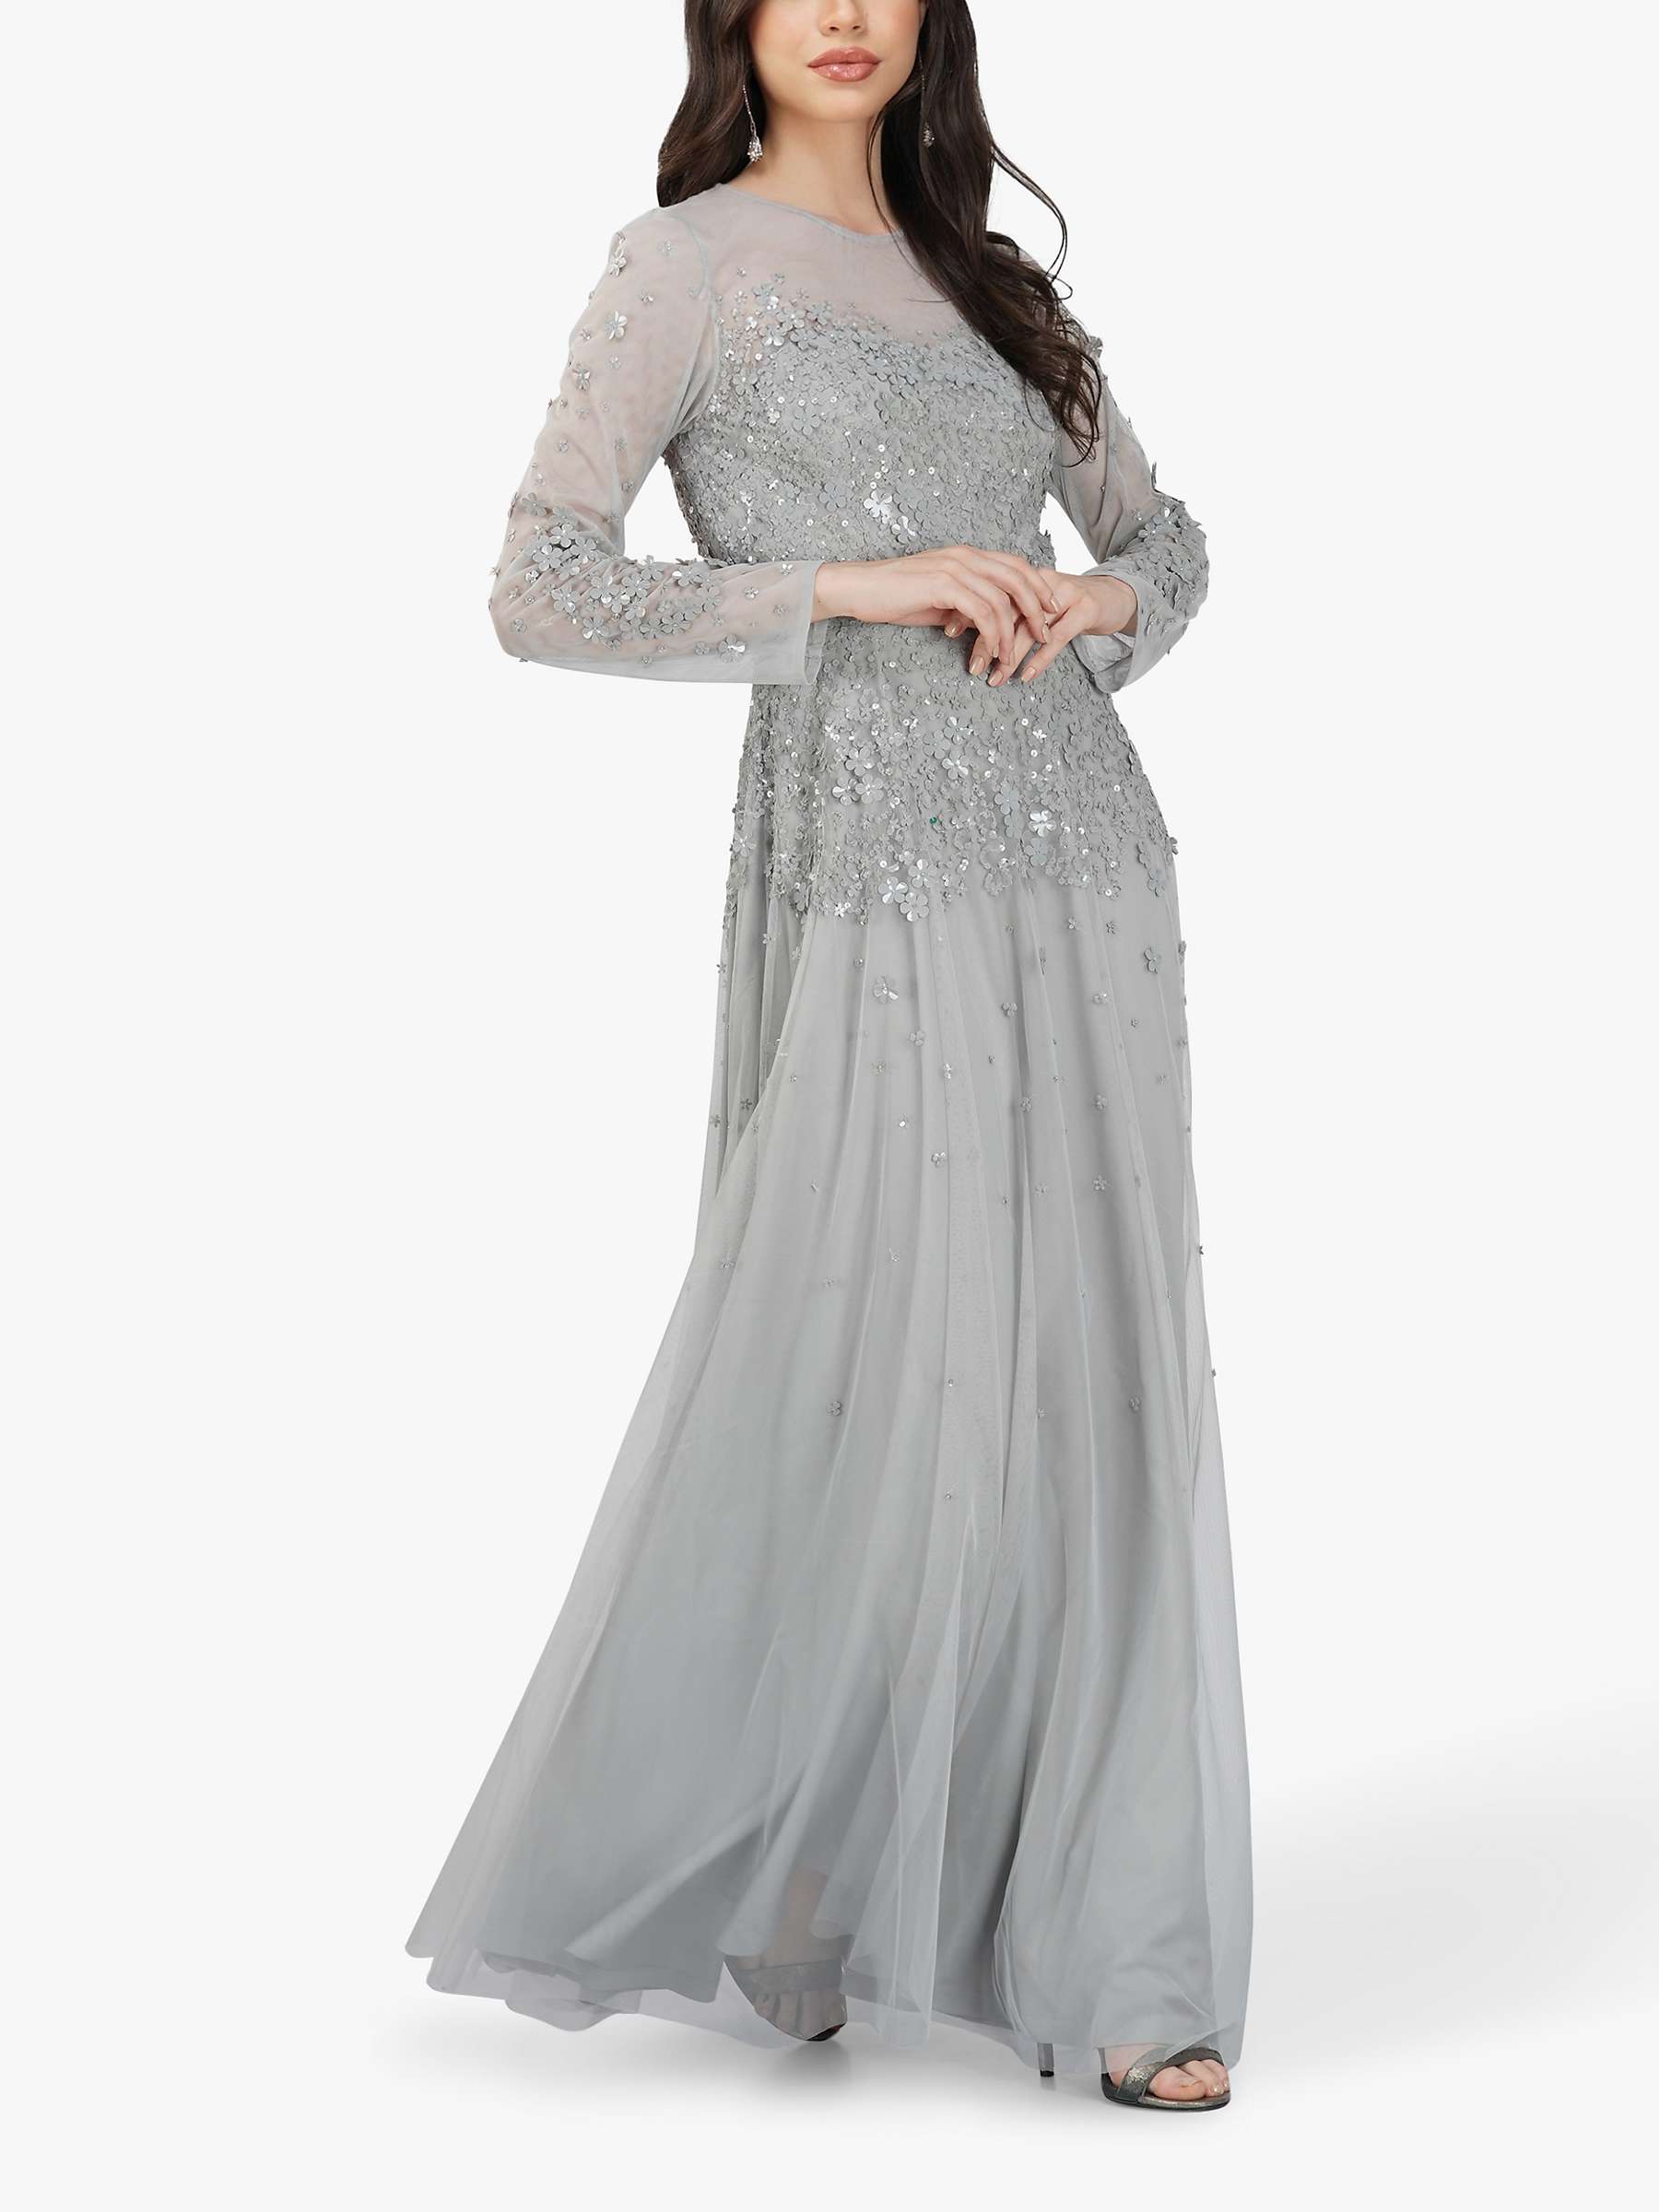 Buy Lace & Beads Luciene Long Sleeve Embellished Maxi Dress Online at johnlewis.com